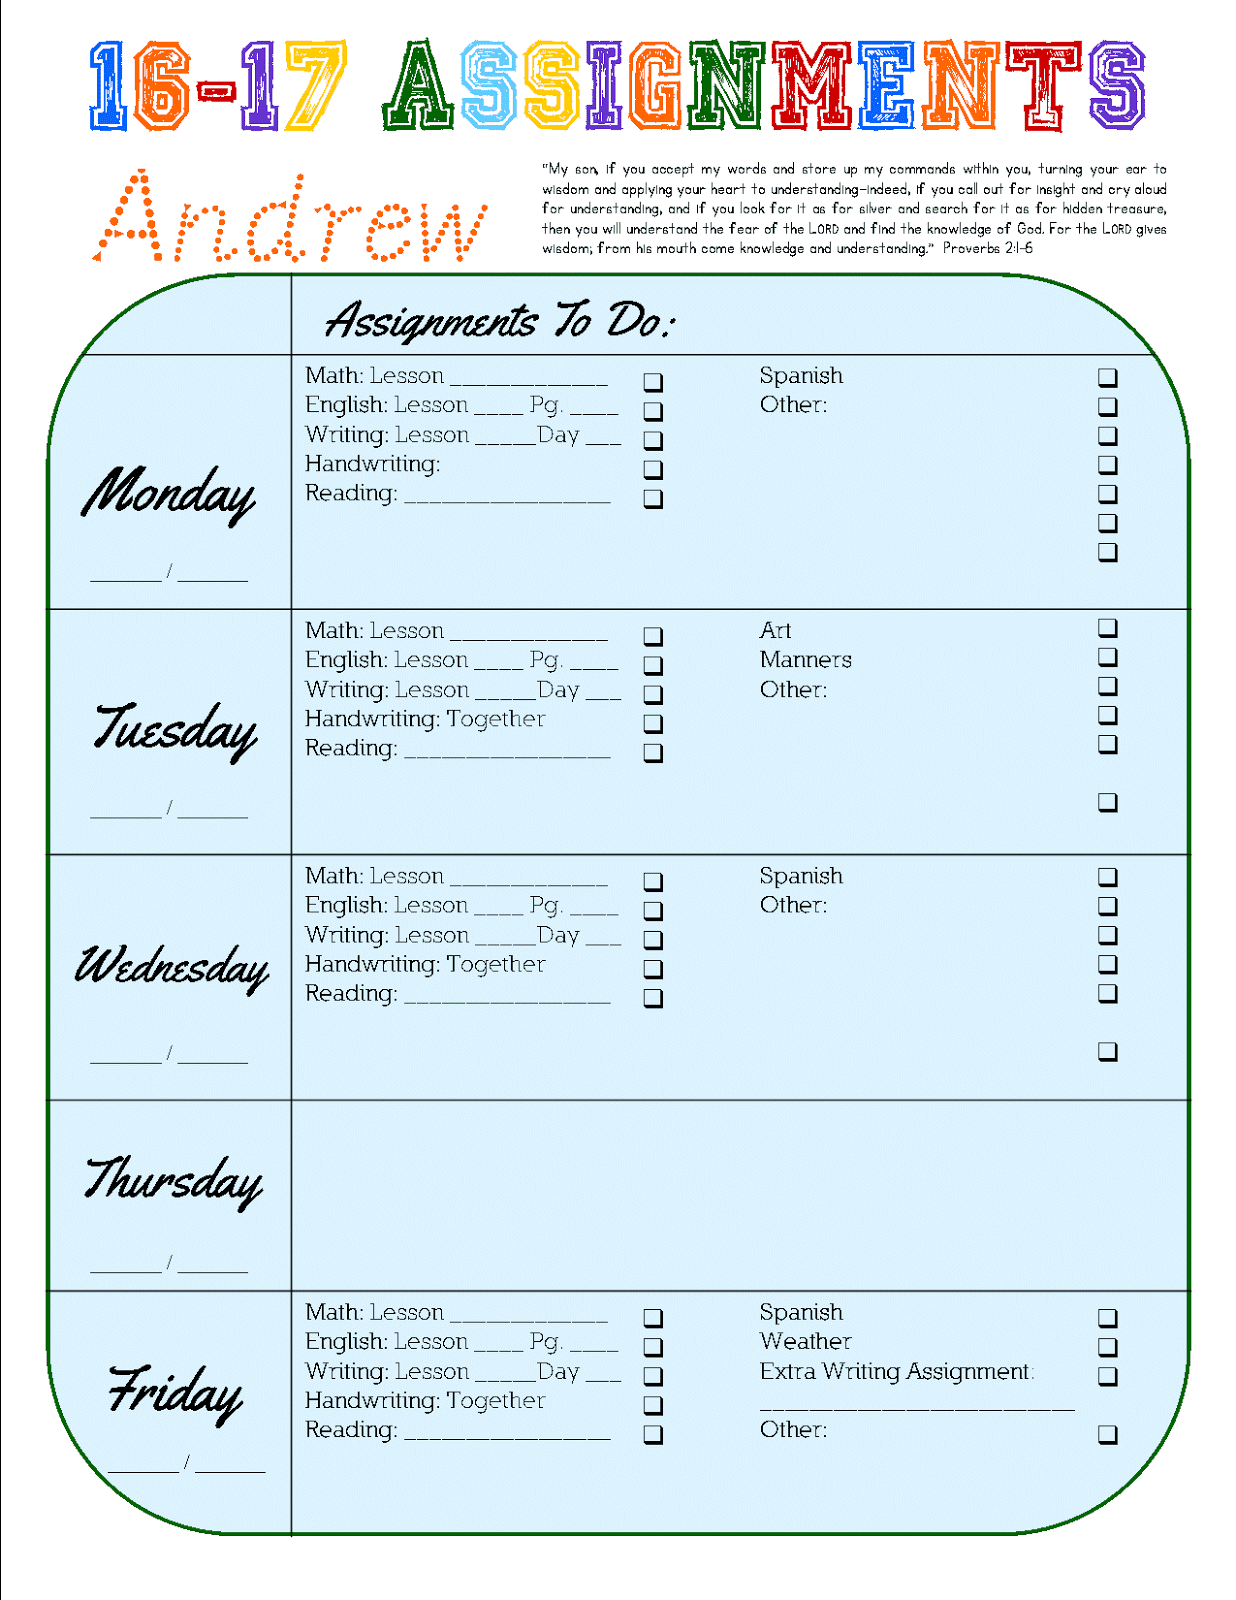 weekly assignment template free